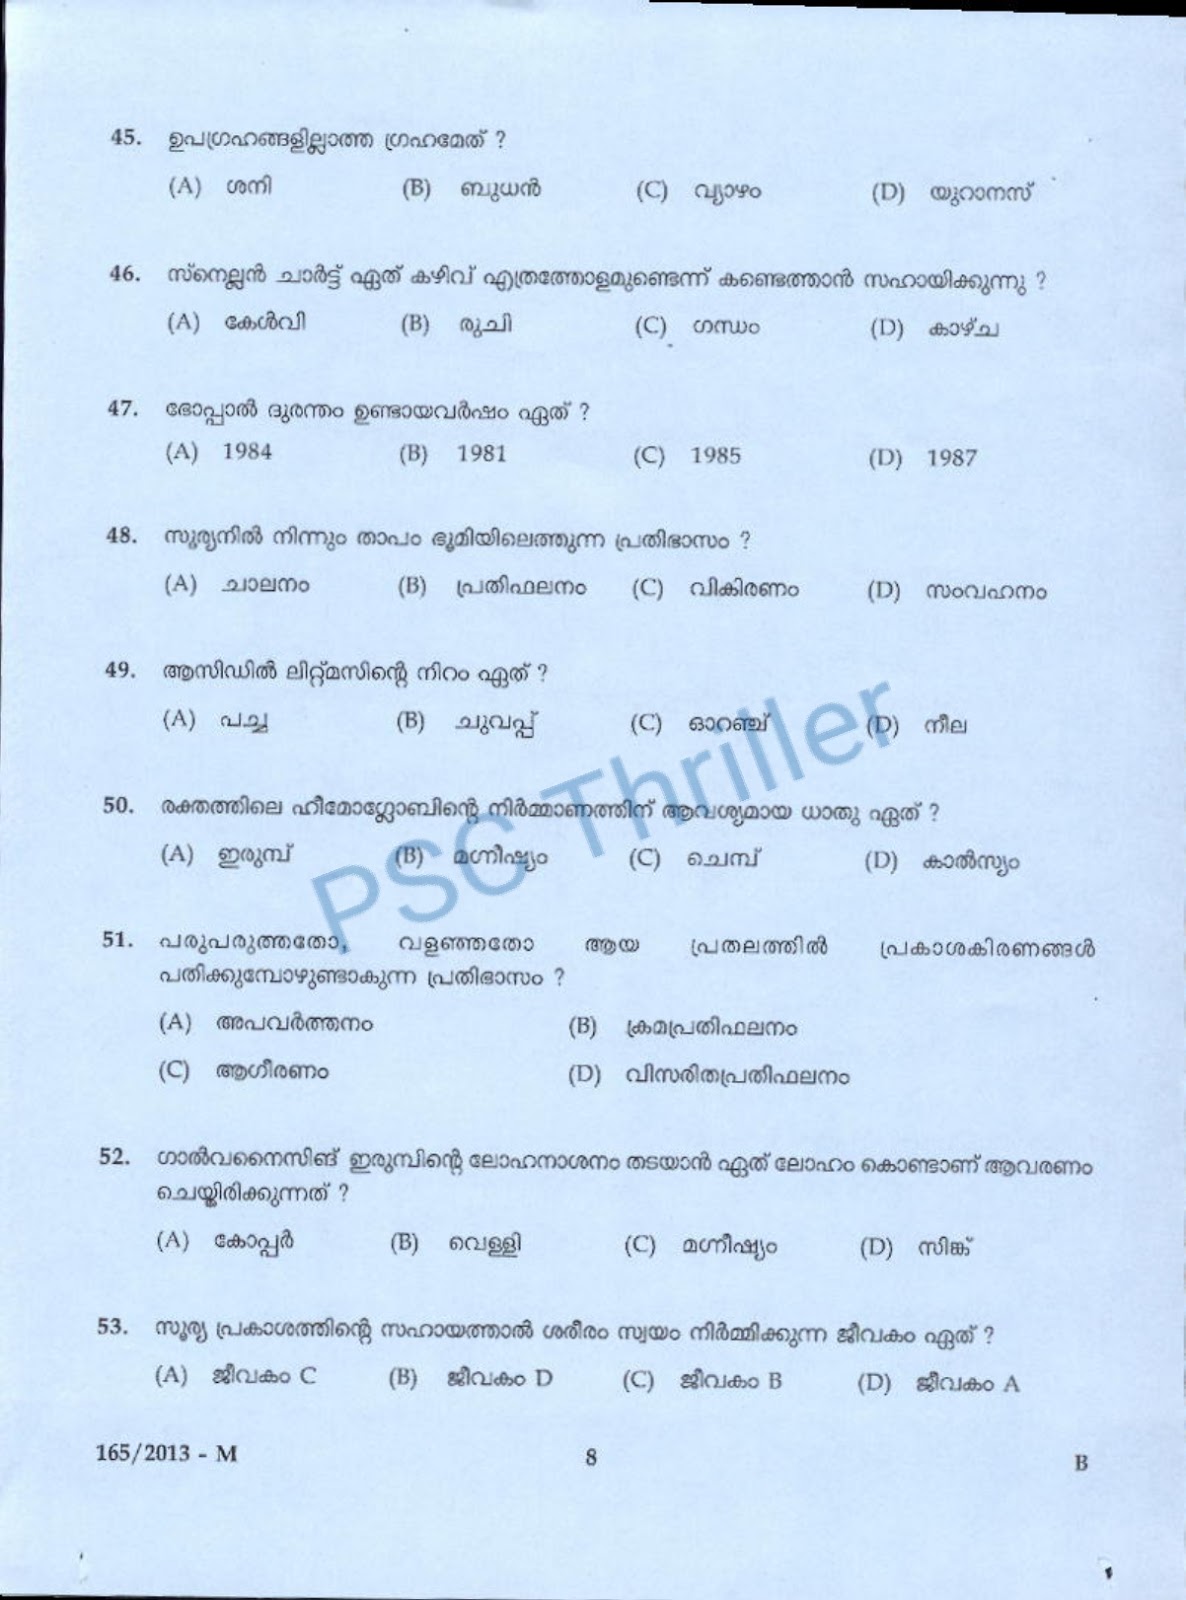 Boat Lascar Question Paper with Answer Key  (165/2013)